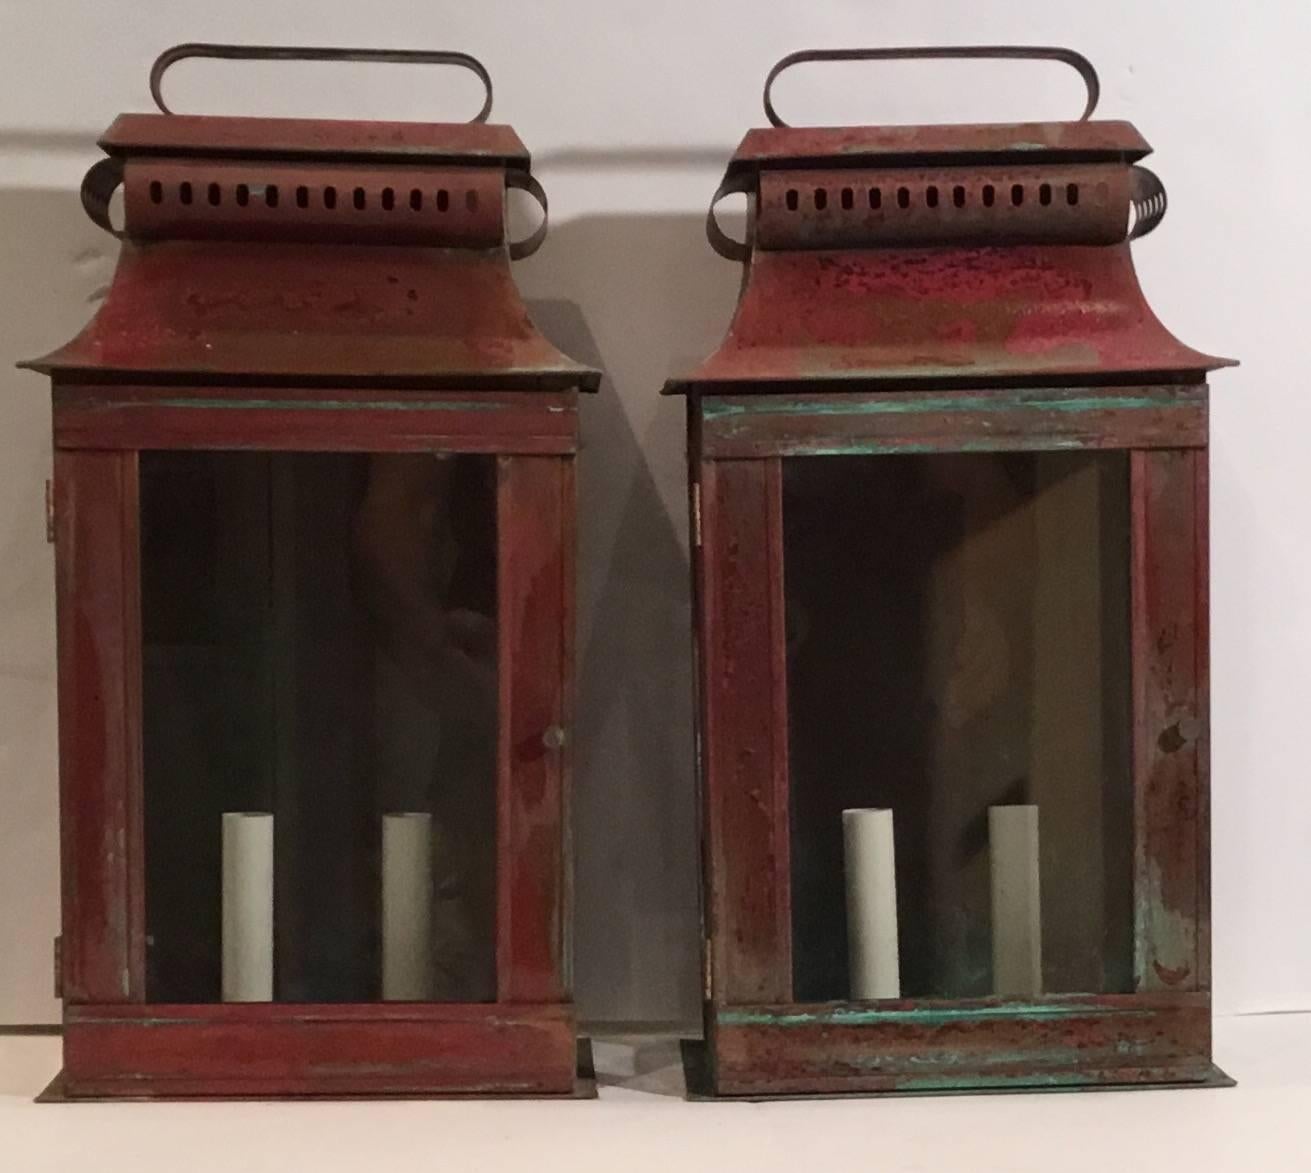 Pair of architectural wall lantern made of copper, with two 60watt lights
electrified and ready to light. Made to US code UL approved.